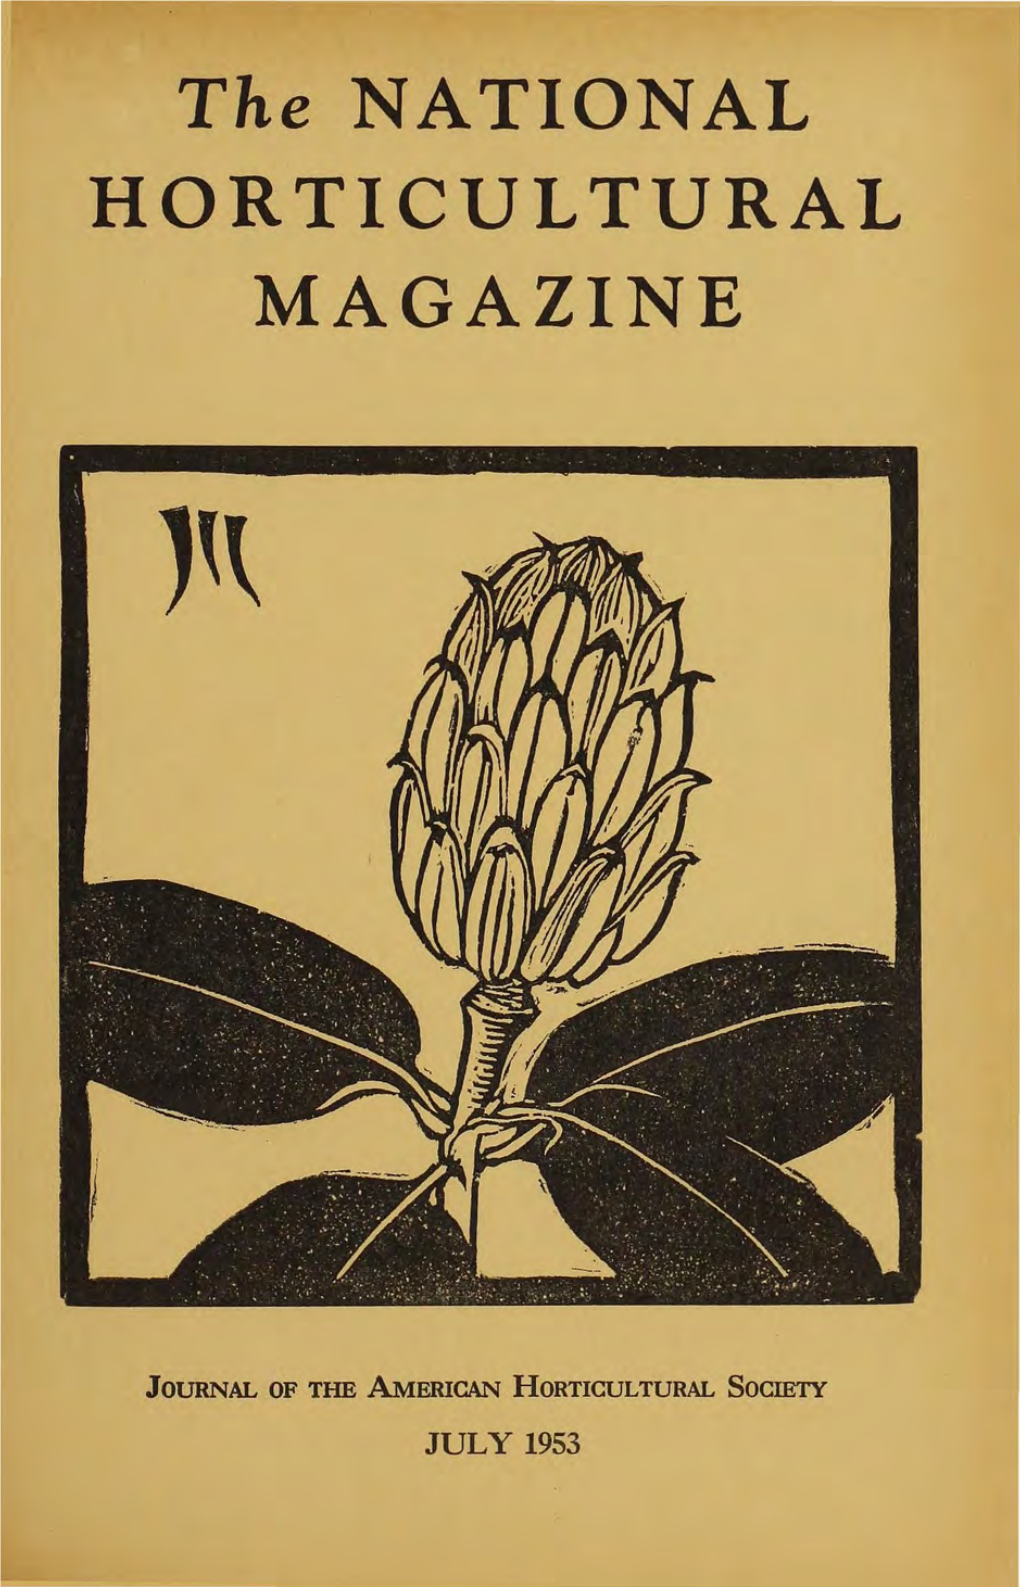 July 1953 the American Horticultural Society, Inc